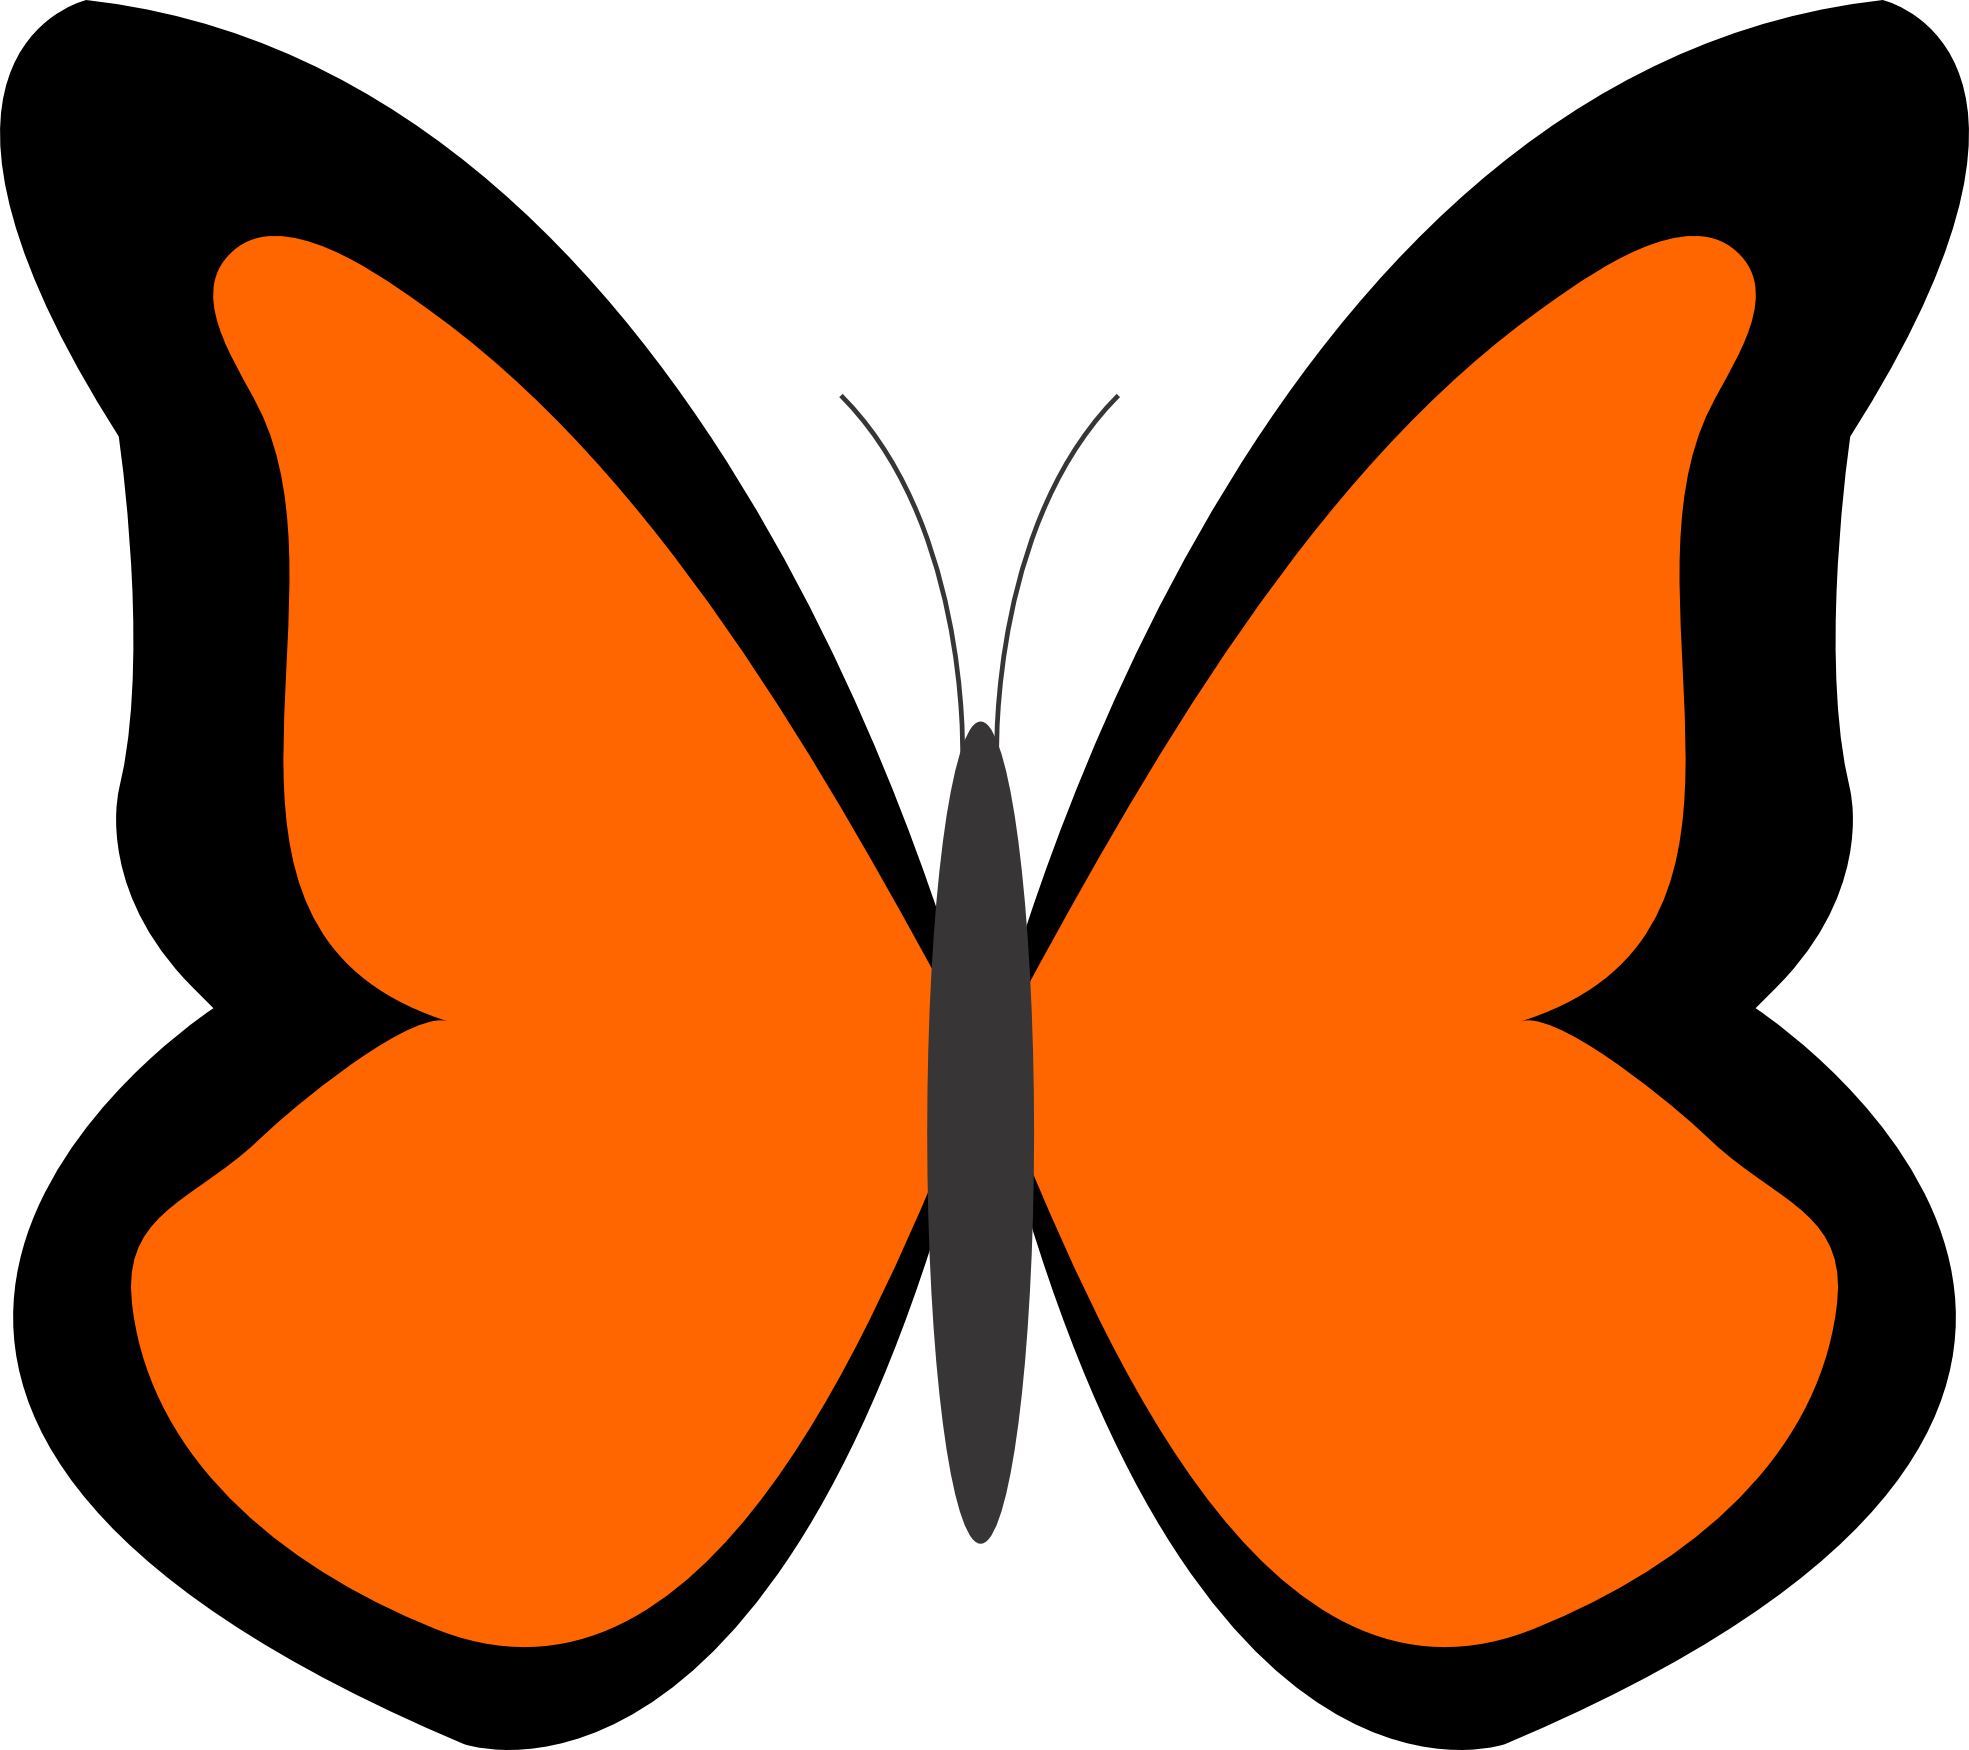 Butterfly images clip art.